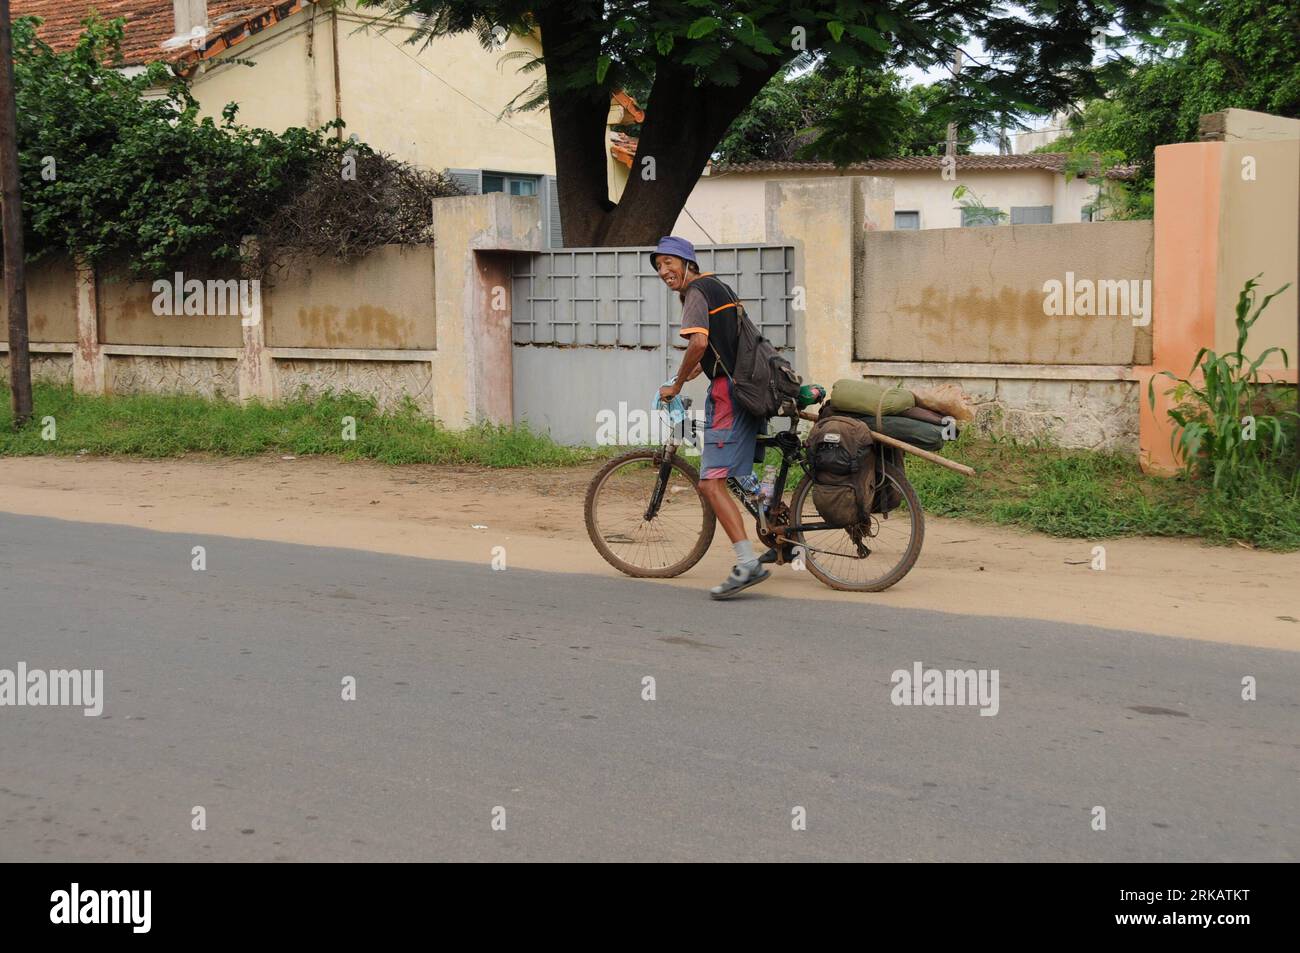 Bildnummer: 54427782  Datum: 14.09.2010  Copyright: imago/Xinhua (100914)-- DAKAR, Sept. 14, 2010 (Xinhua)-- Chinese cyclist Li Yuezhong is seen on a street in Dakar, capital of Senegal, Sept. 14, 2010. Li Yuezhong, 53-year-old, started his current global travel by bicycle in . Senegal is the 129th country he visited.(Xinhua/Chen Shun) (gyq) SENEGAL-DAKAR-CHINESE CYCLIST GLOBAL TRAVEL PUBLICATIONxNOTxINxCHN Gesellschaft Weltreise Rad Fahrrad People Reise Premiumd xint kbdig xub 2010 quer    Bildnummer 54427782 Date 14 09 2010 Copyright Imago XINHUA  Dakar Sept 14 2010 XINHUA Chinese Cyclist le Banque D'Images